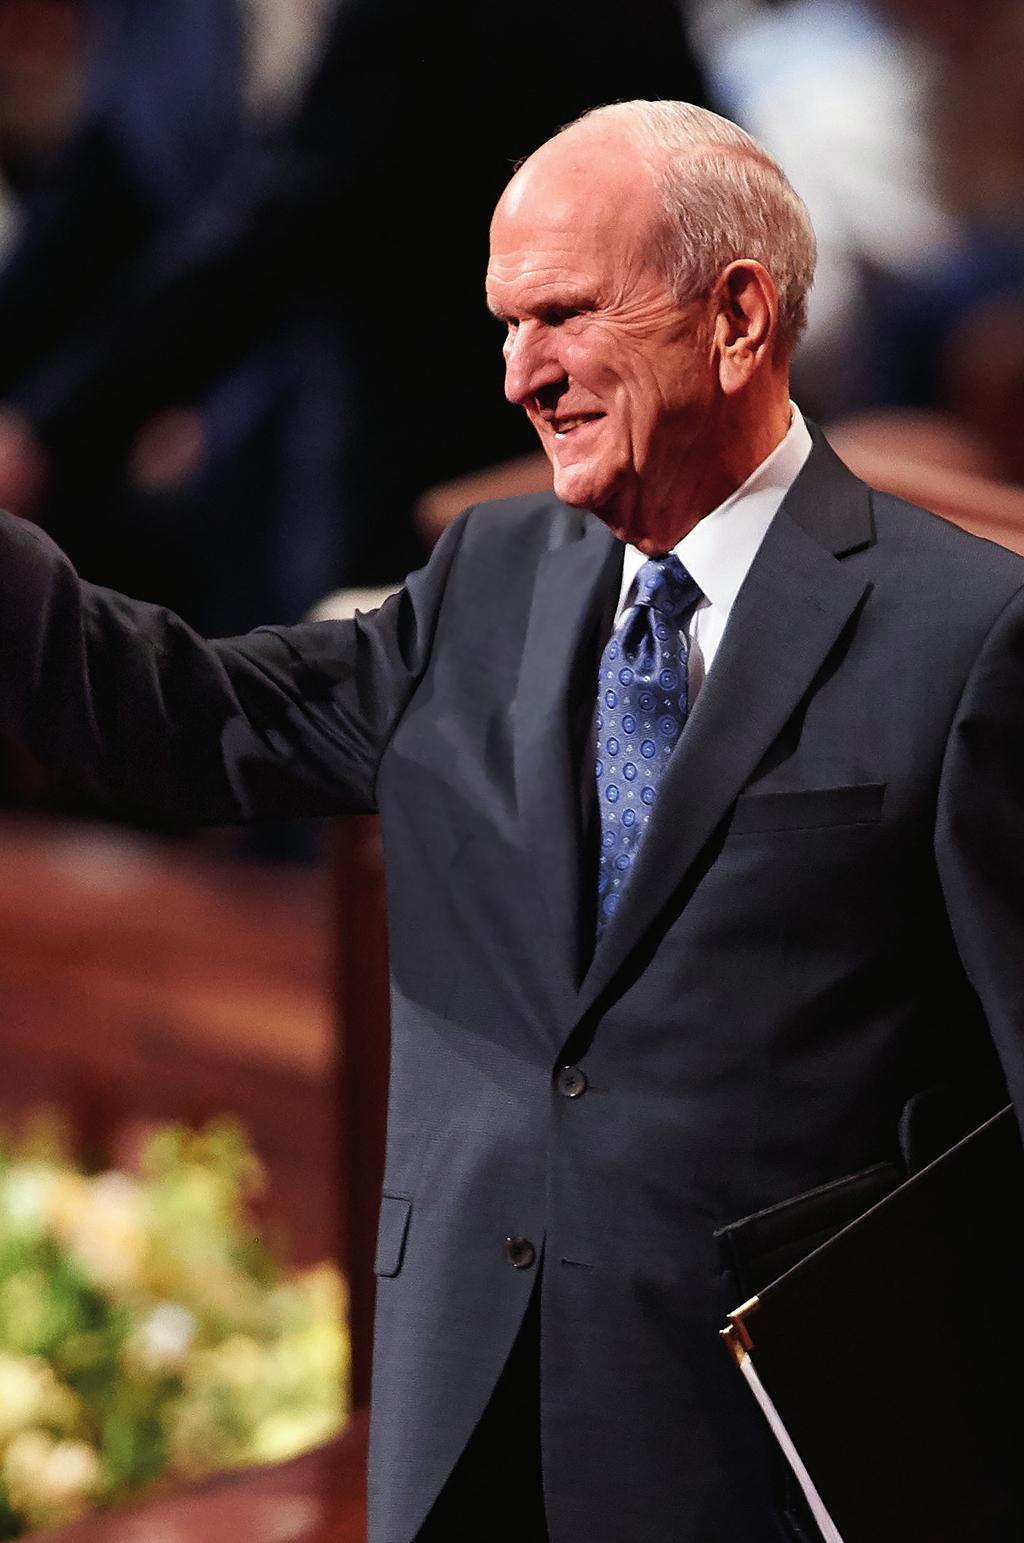 GENERAL CONFERENCE IS JUST AROUND THE CORNER. SO LET S PREPARE TO BE UPLIFTED, CHALLENGED, AND INSPIRED.